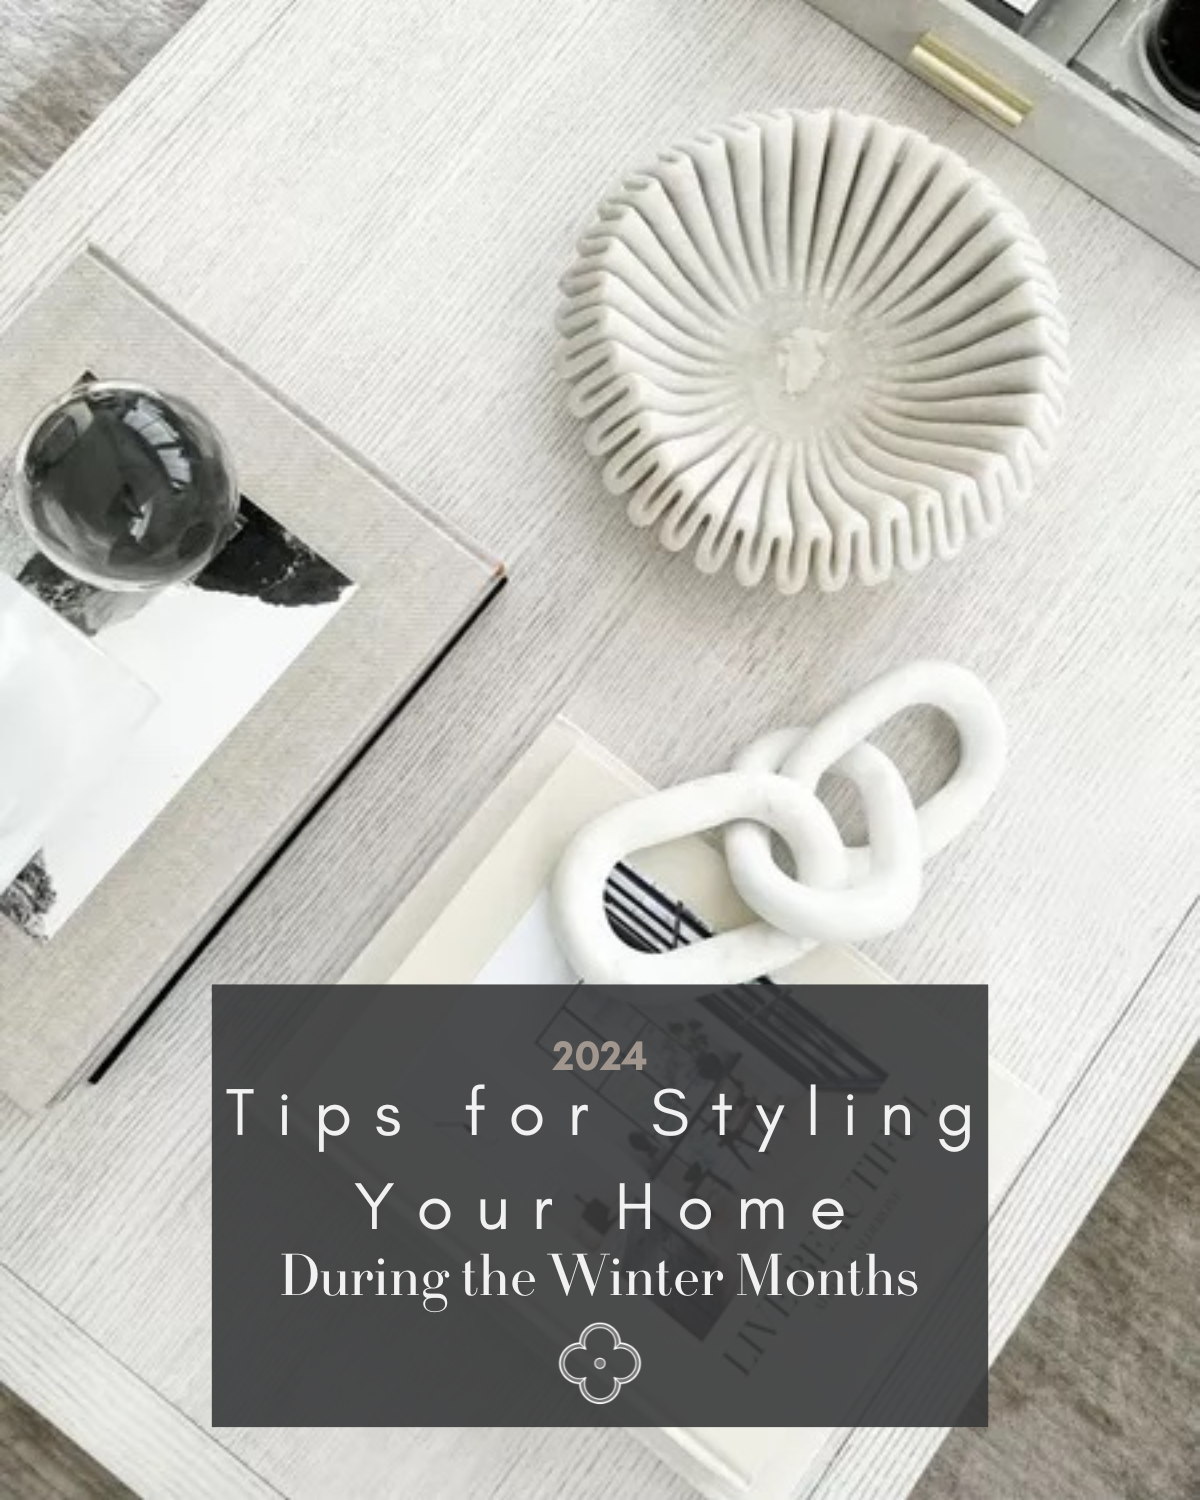 tips for styling your home during the winter months | home, home styling, winter months, winter decor, winter season, home decor, home decor tips, modern, modern home, white decor, centerpiece bowl